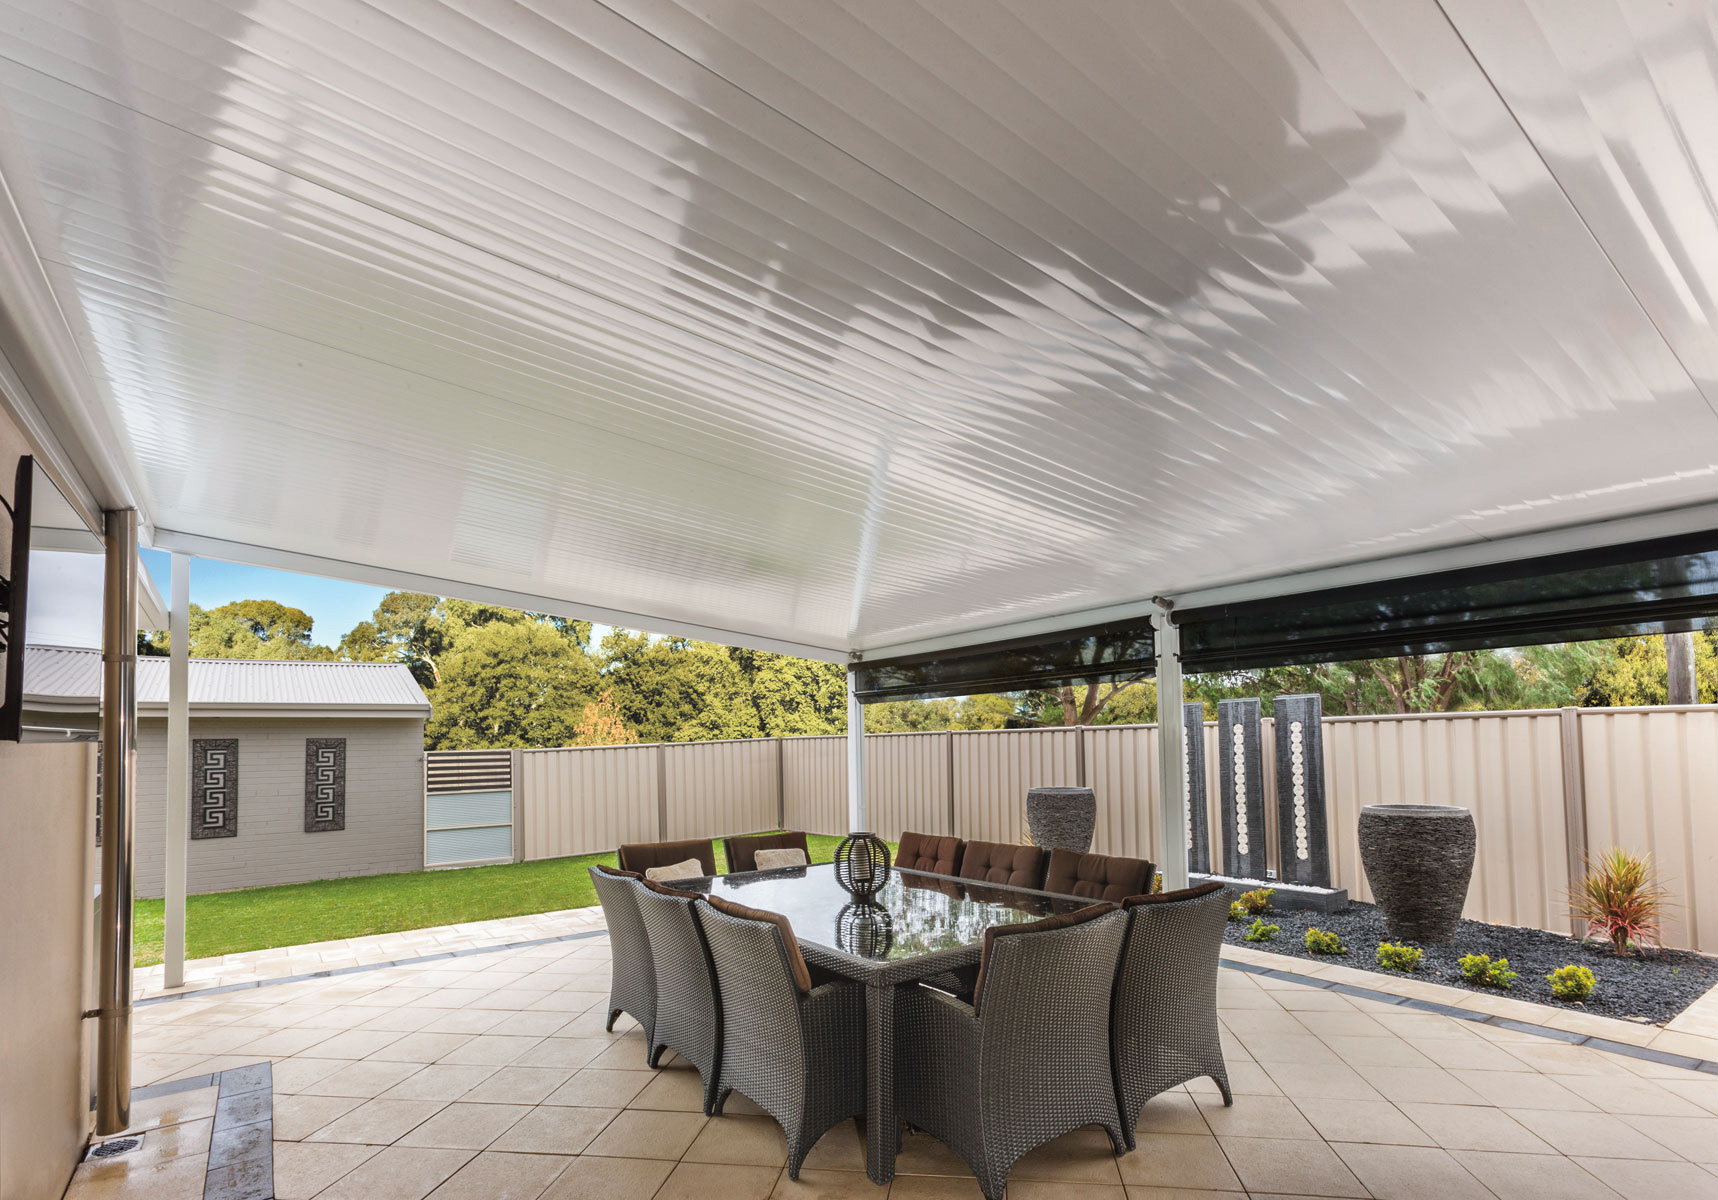 Stratco Cooldek skillion outdoor covering at rear of home